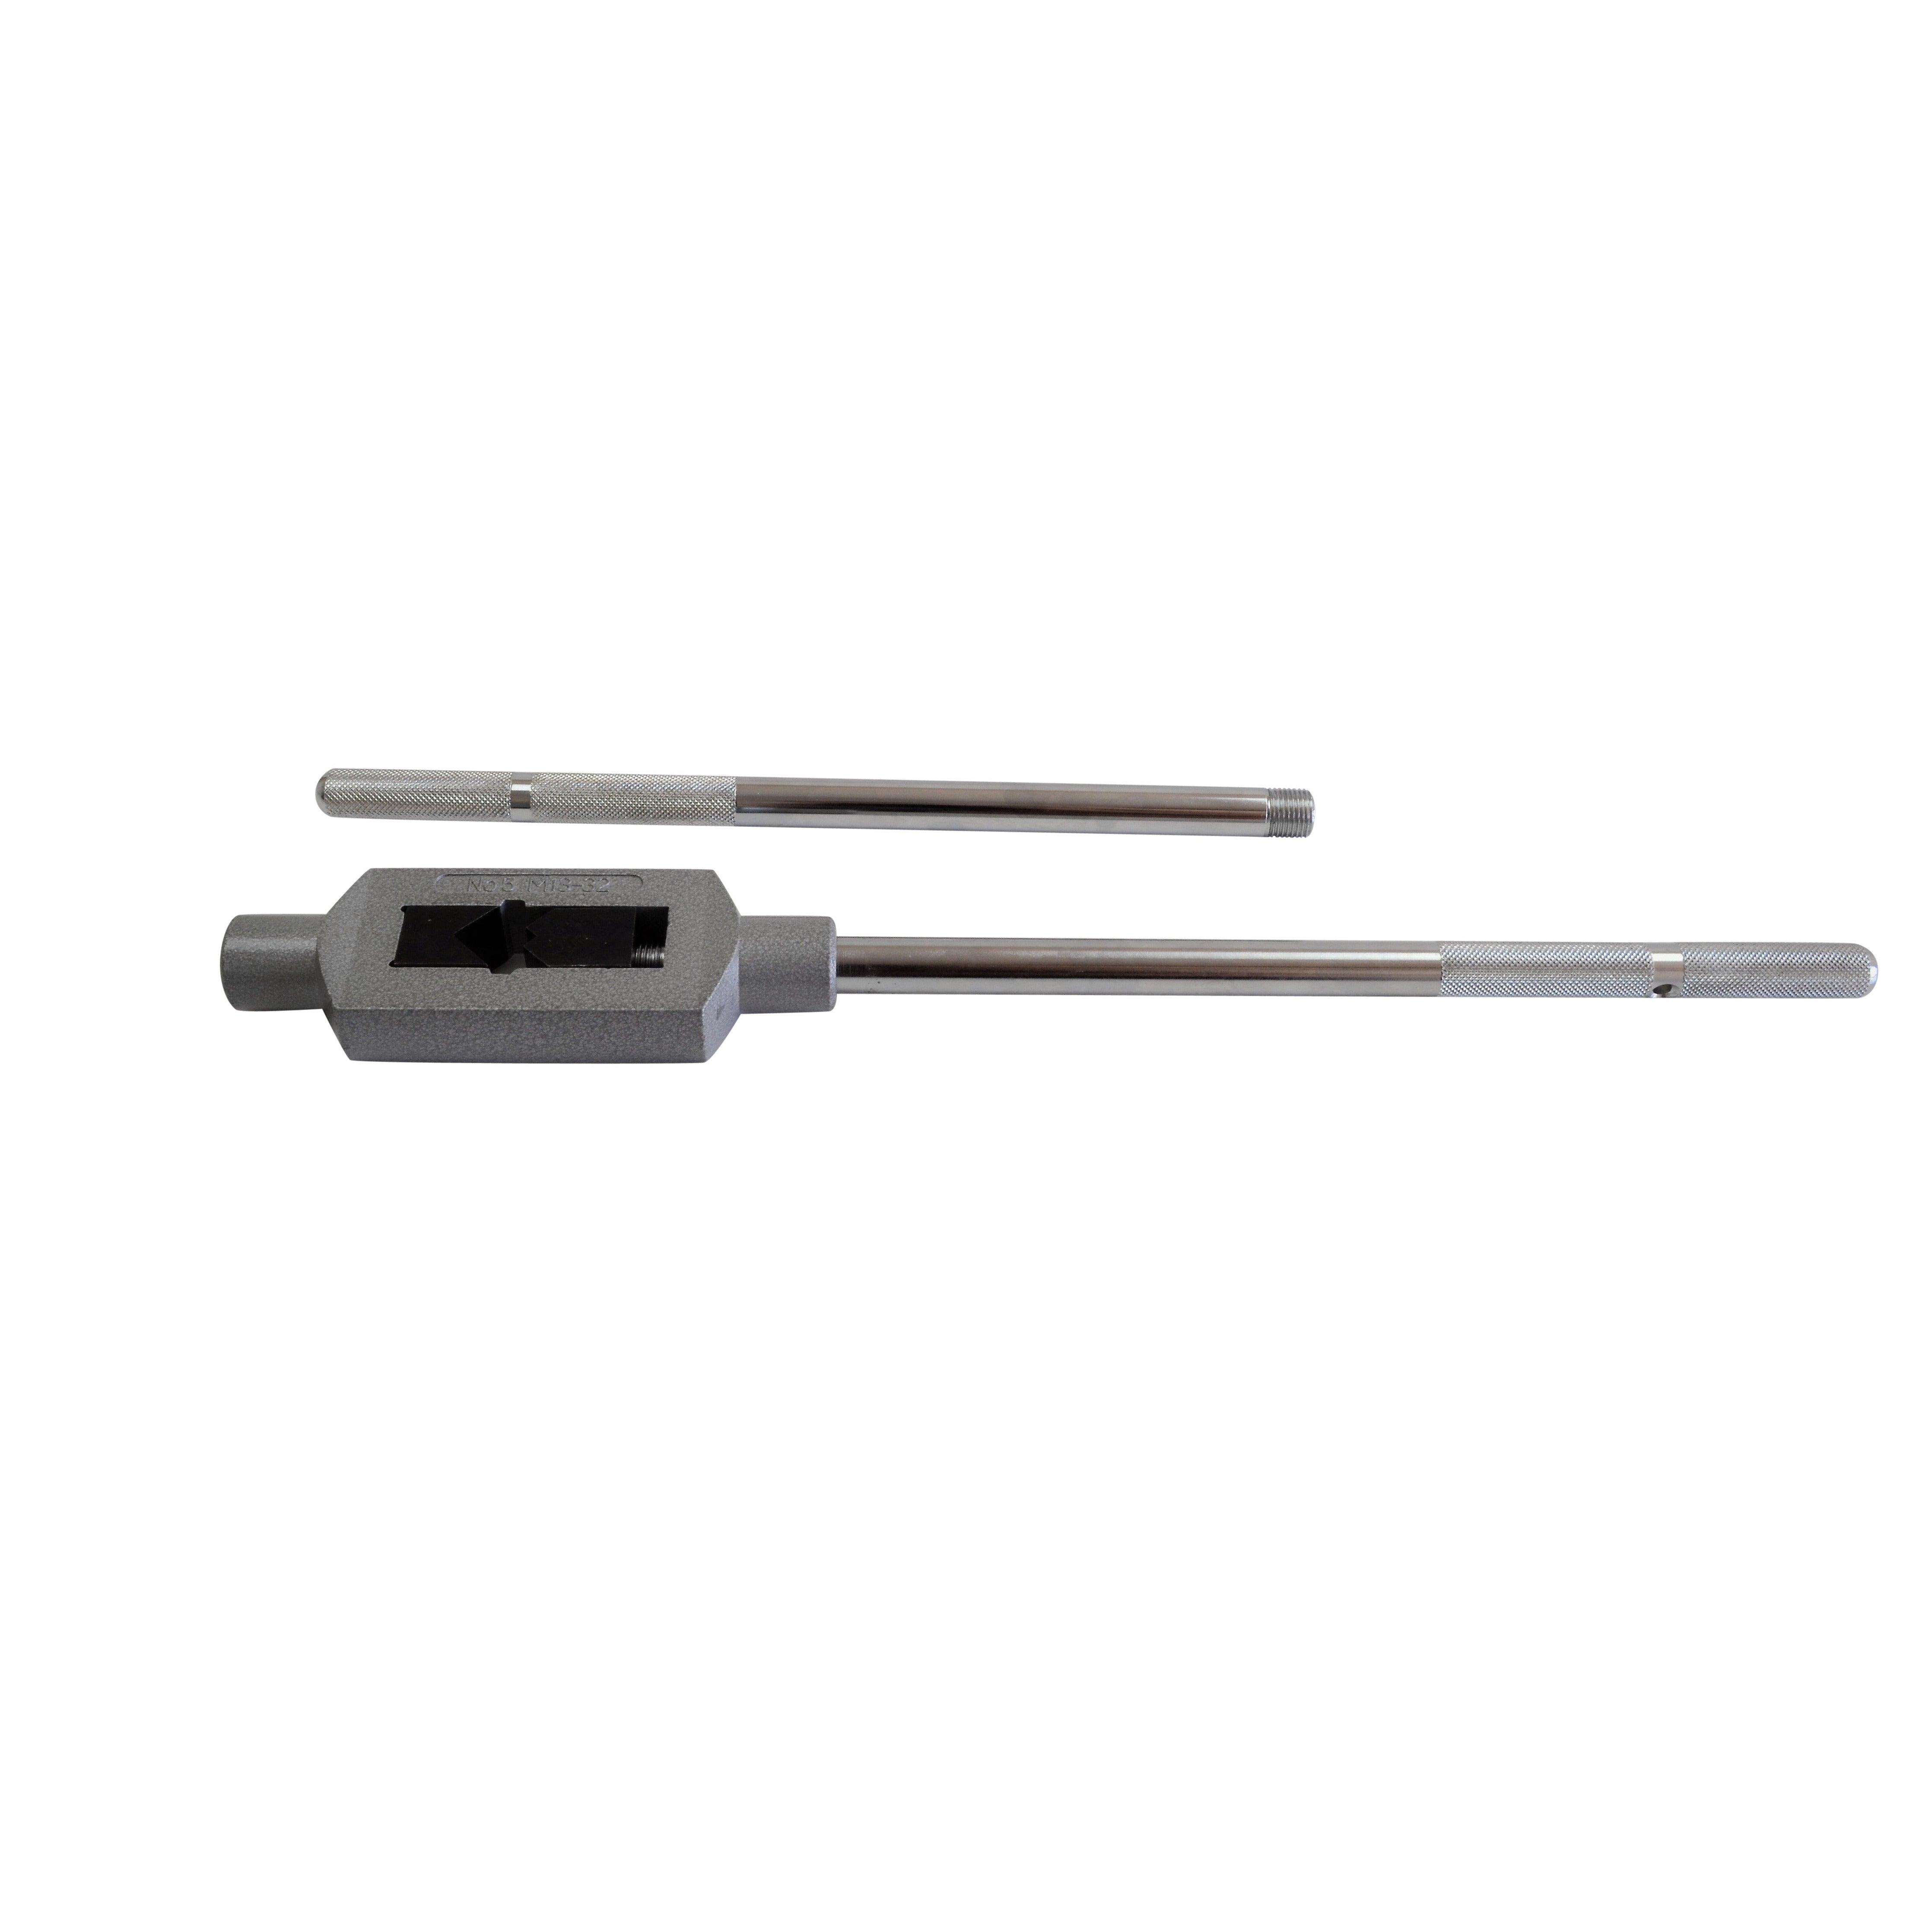 adjustable tap handle T type reamer wrench knurled grip No 5 M13-32 74cm cnc industrial supplies metalwork